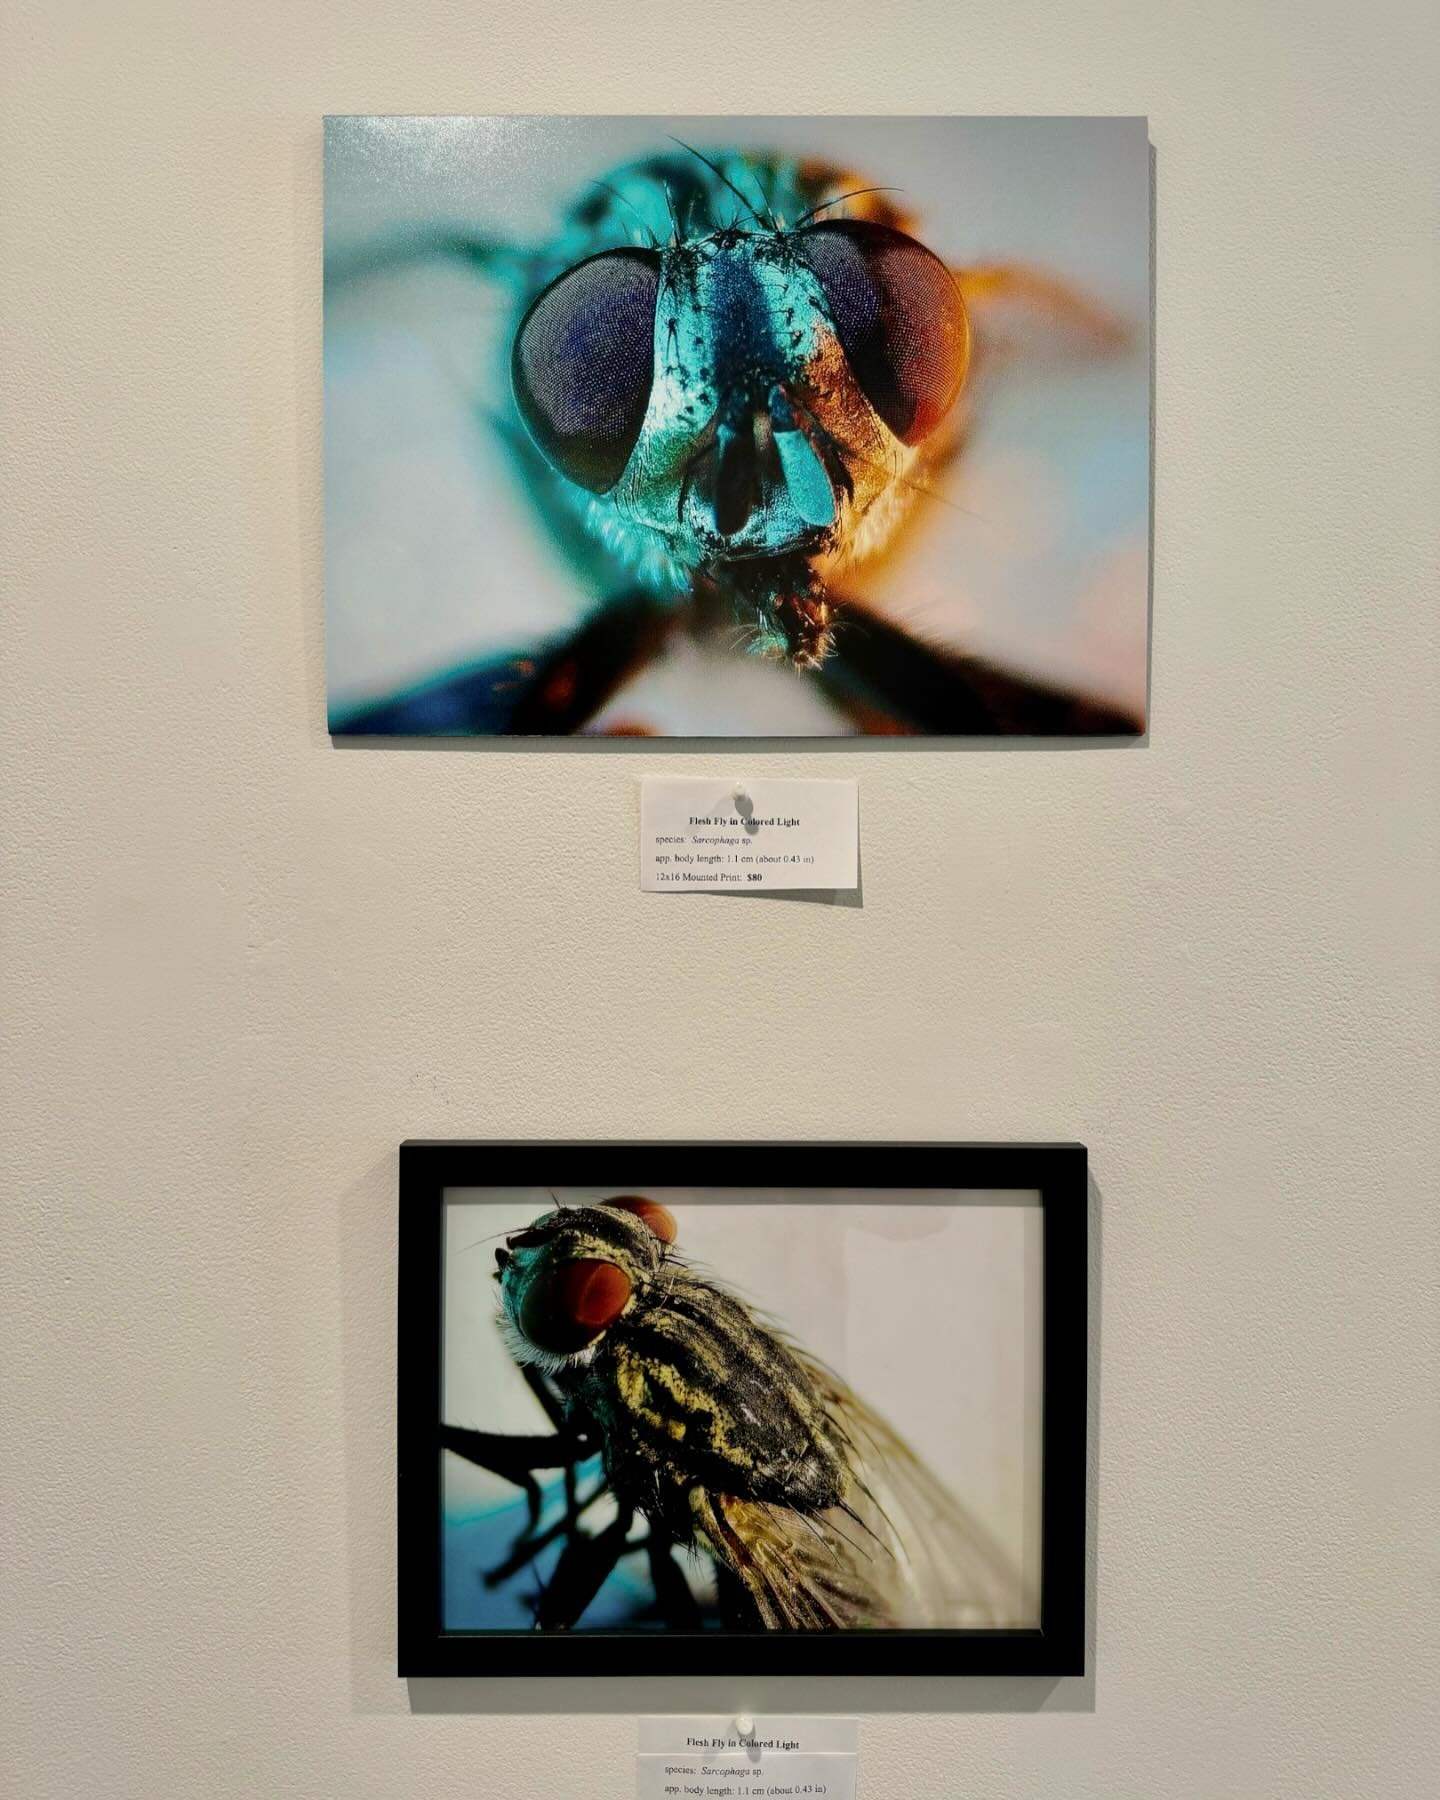 Our May gallery walls are looking pretty fly!! 🪰🐞🦟

Welcoming Artist of the Month, Patrick Allen! 
&ldquo;A Rock Hill resident, Winthrop alumnus and longtime friend of Slow Play Brewing. He showcases the detailed faces and features of these tiny c